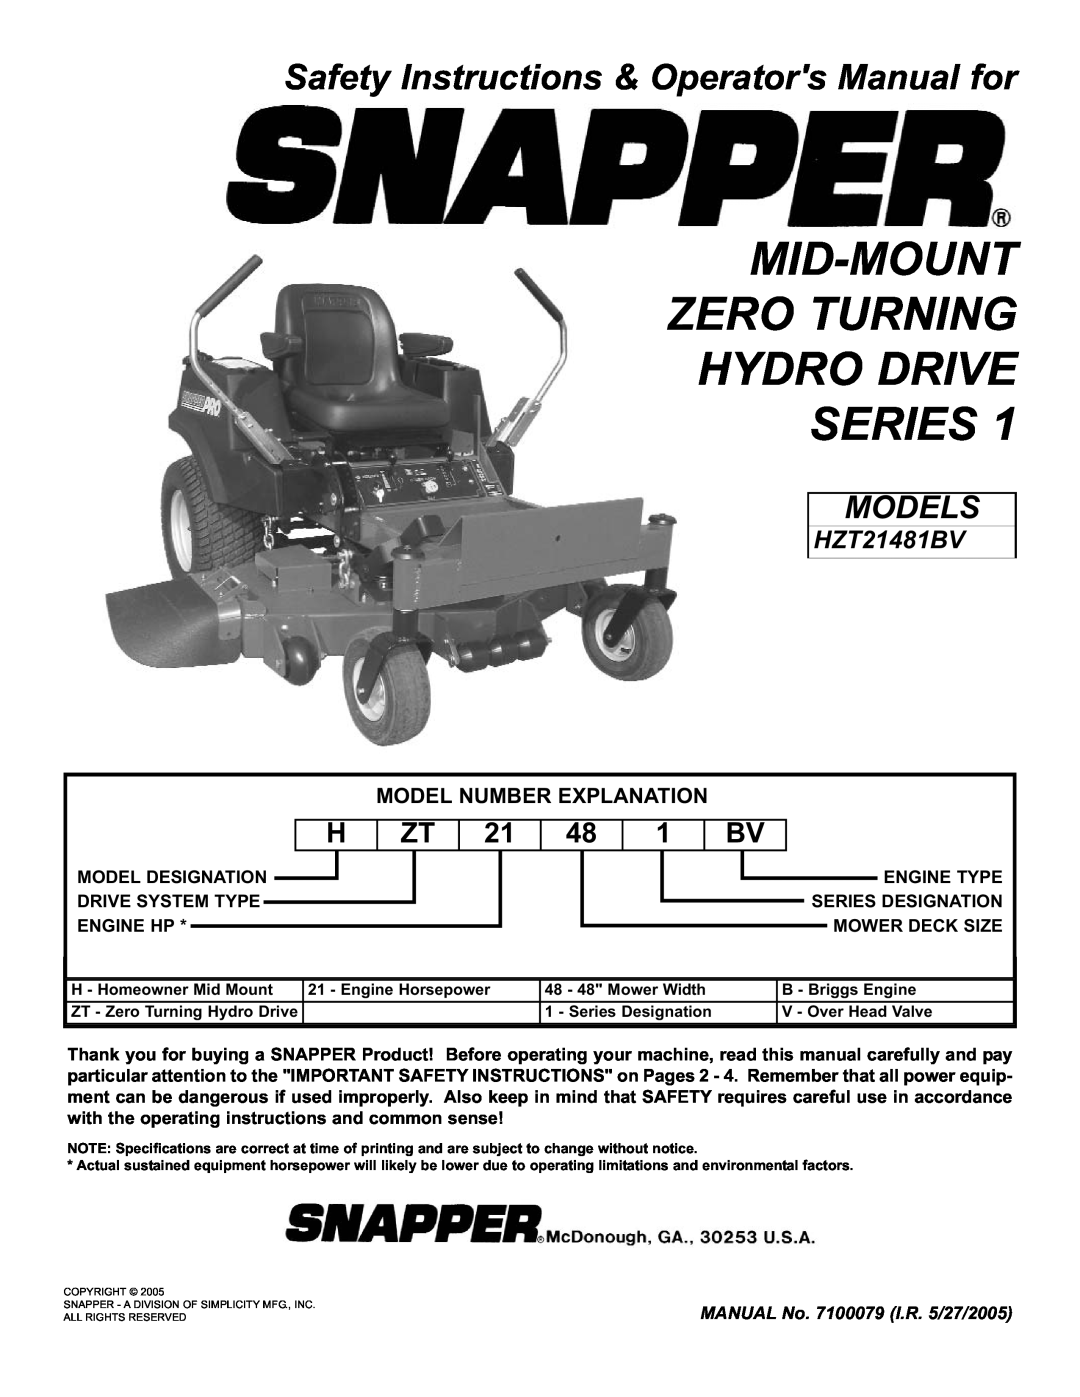 Snapper HZT21481BV important safety instructions Mid-Mount Zero Turning Hydro Drive Series, Models 